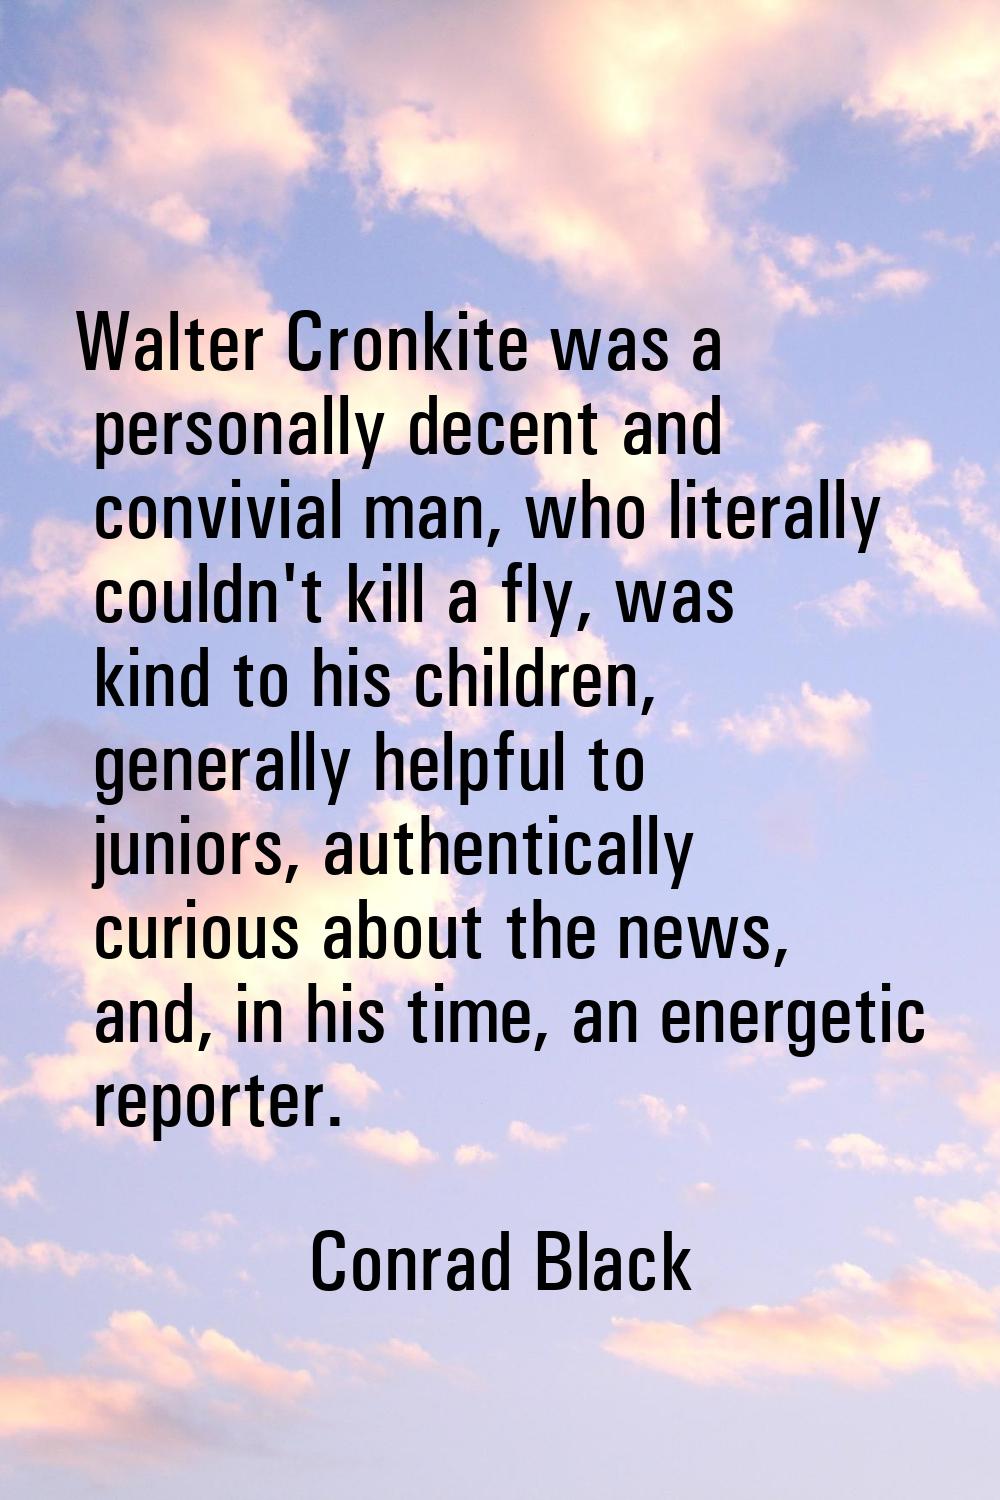 Walter Cronkite was a personally decent and convivial man, who literally couldn't kill a fly, was k